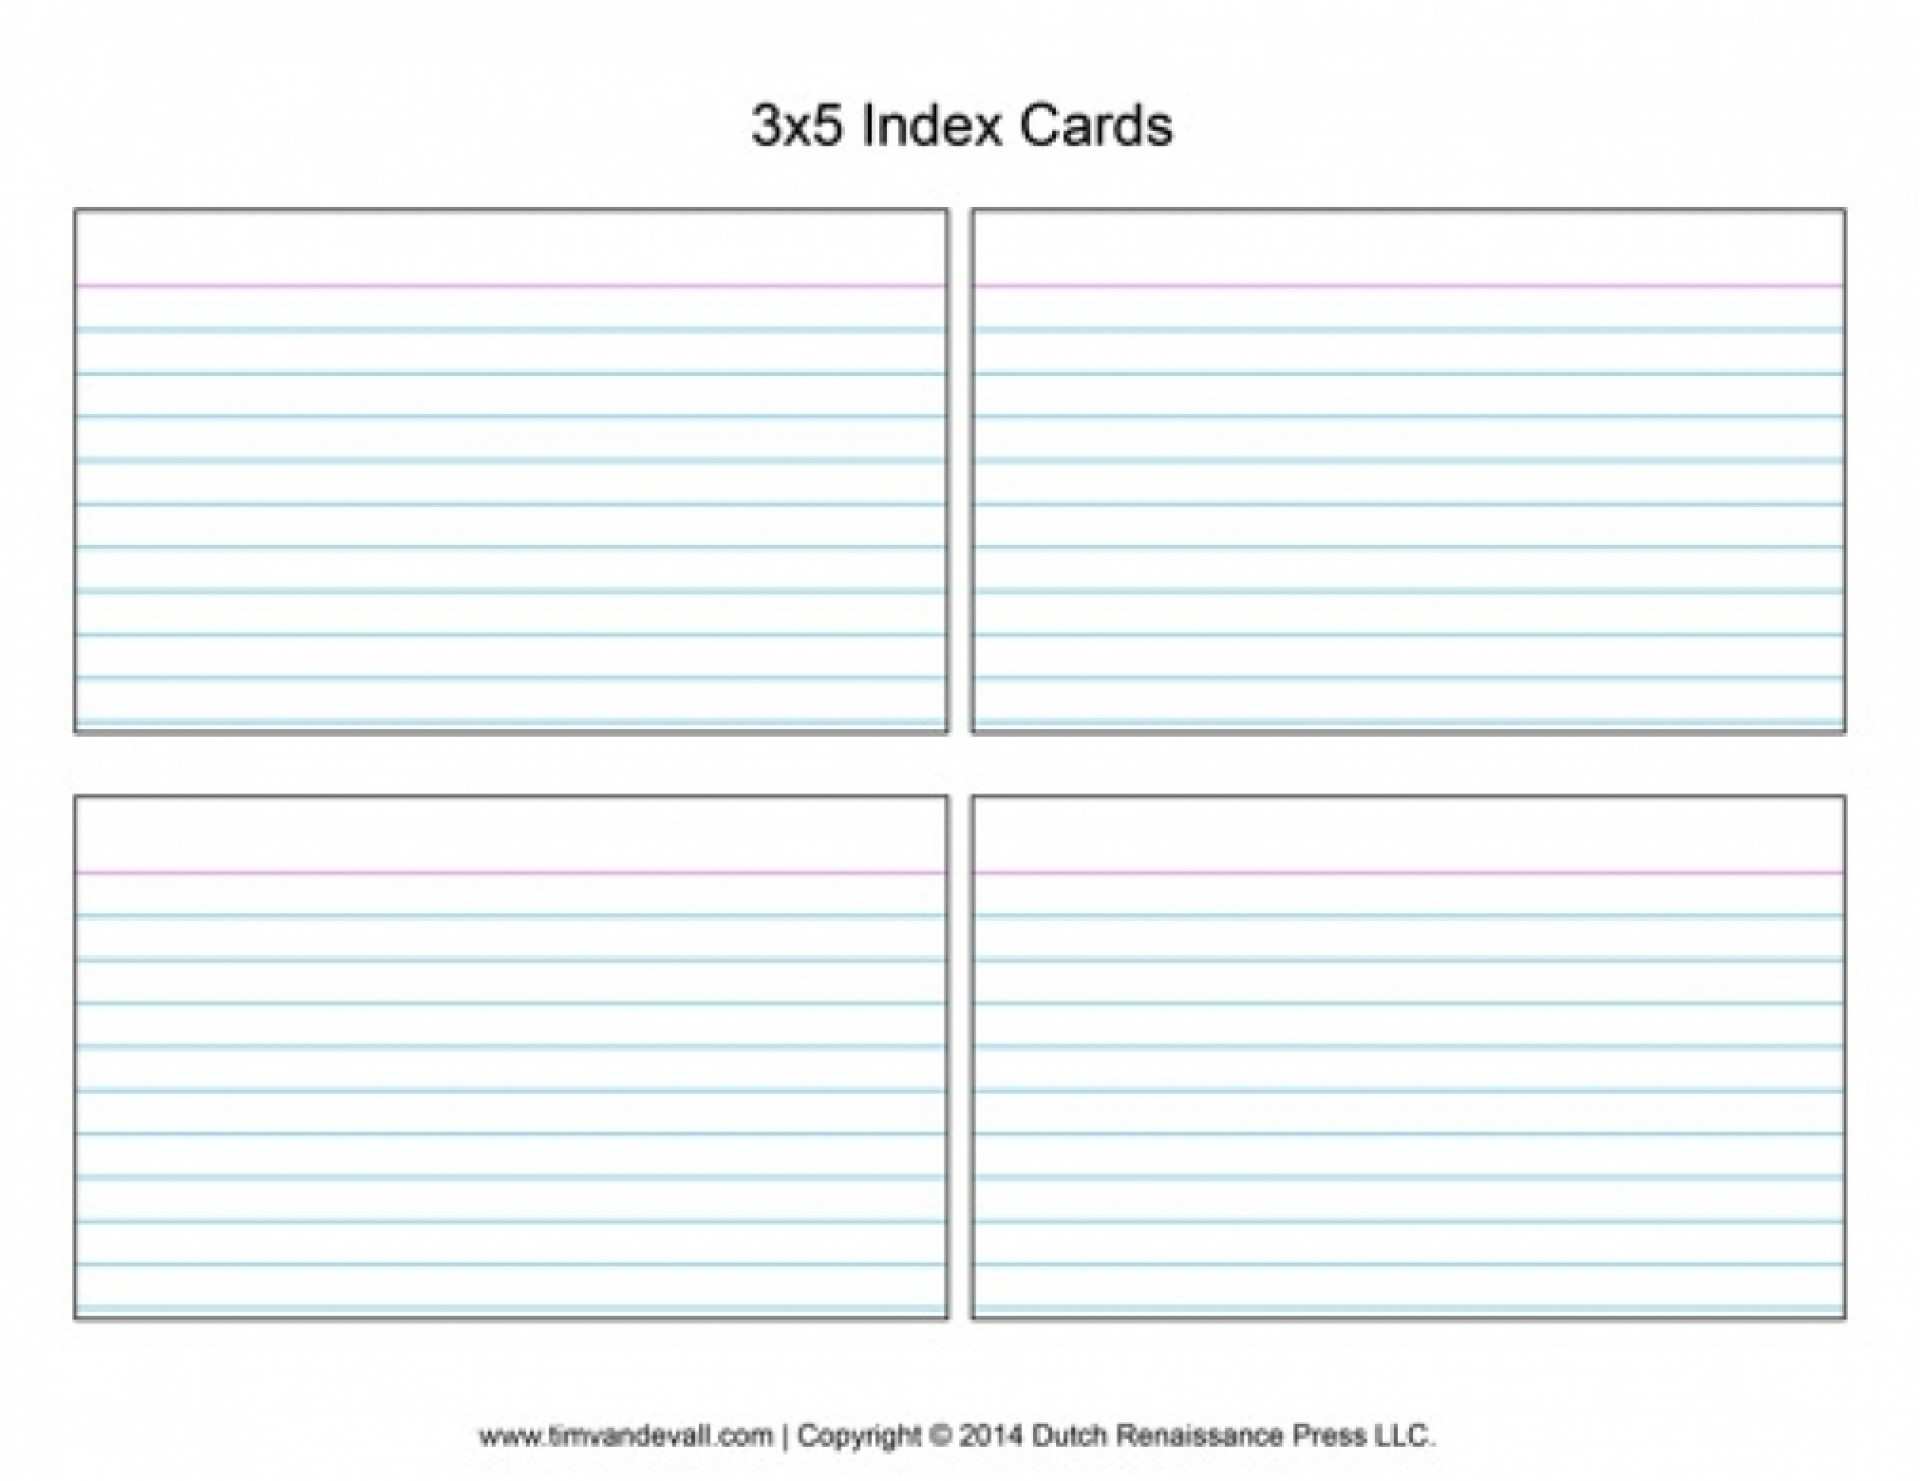 225 Creative Index Card 225X25 Template Microsoft Word Photo with Intended For 3 X 5 Index Card Template